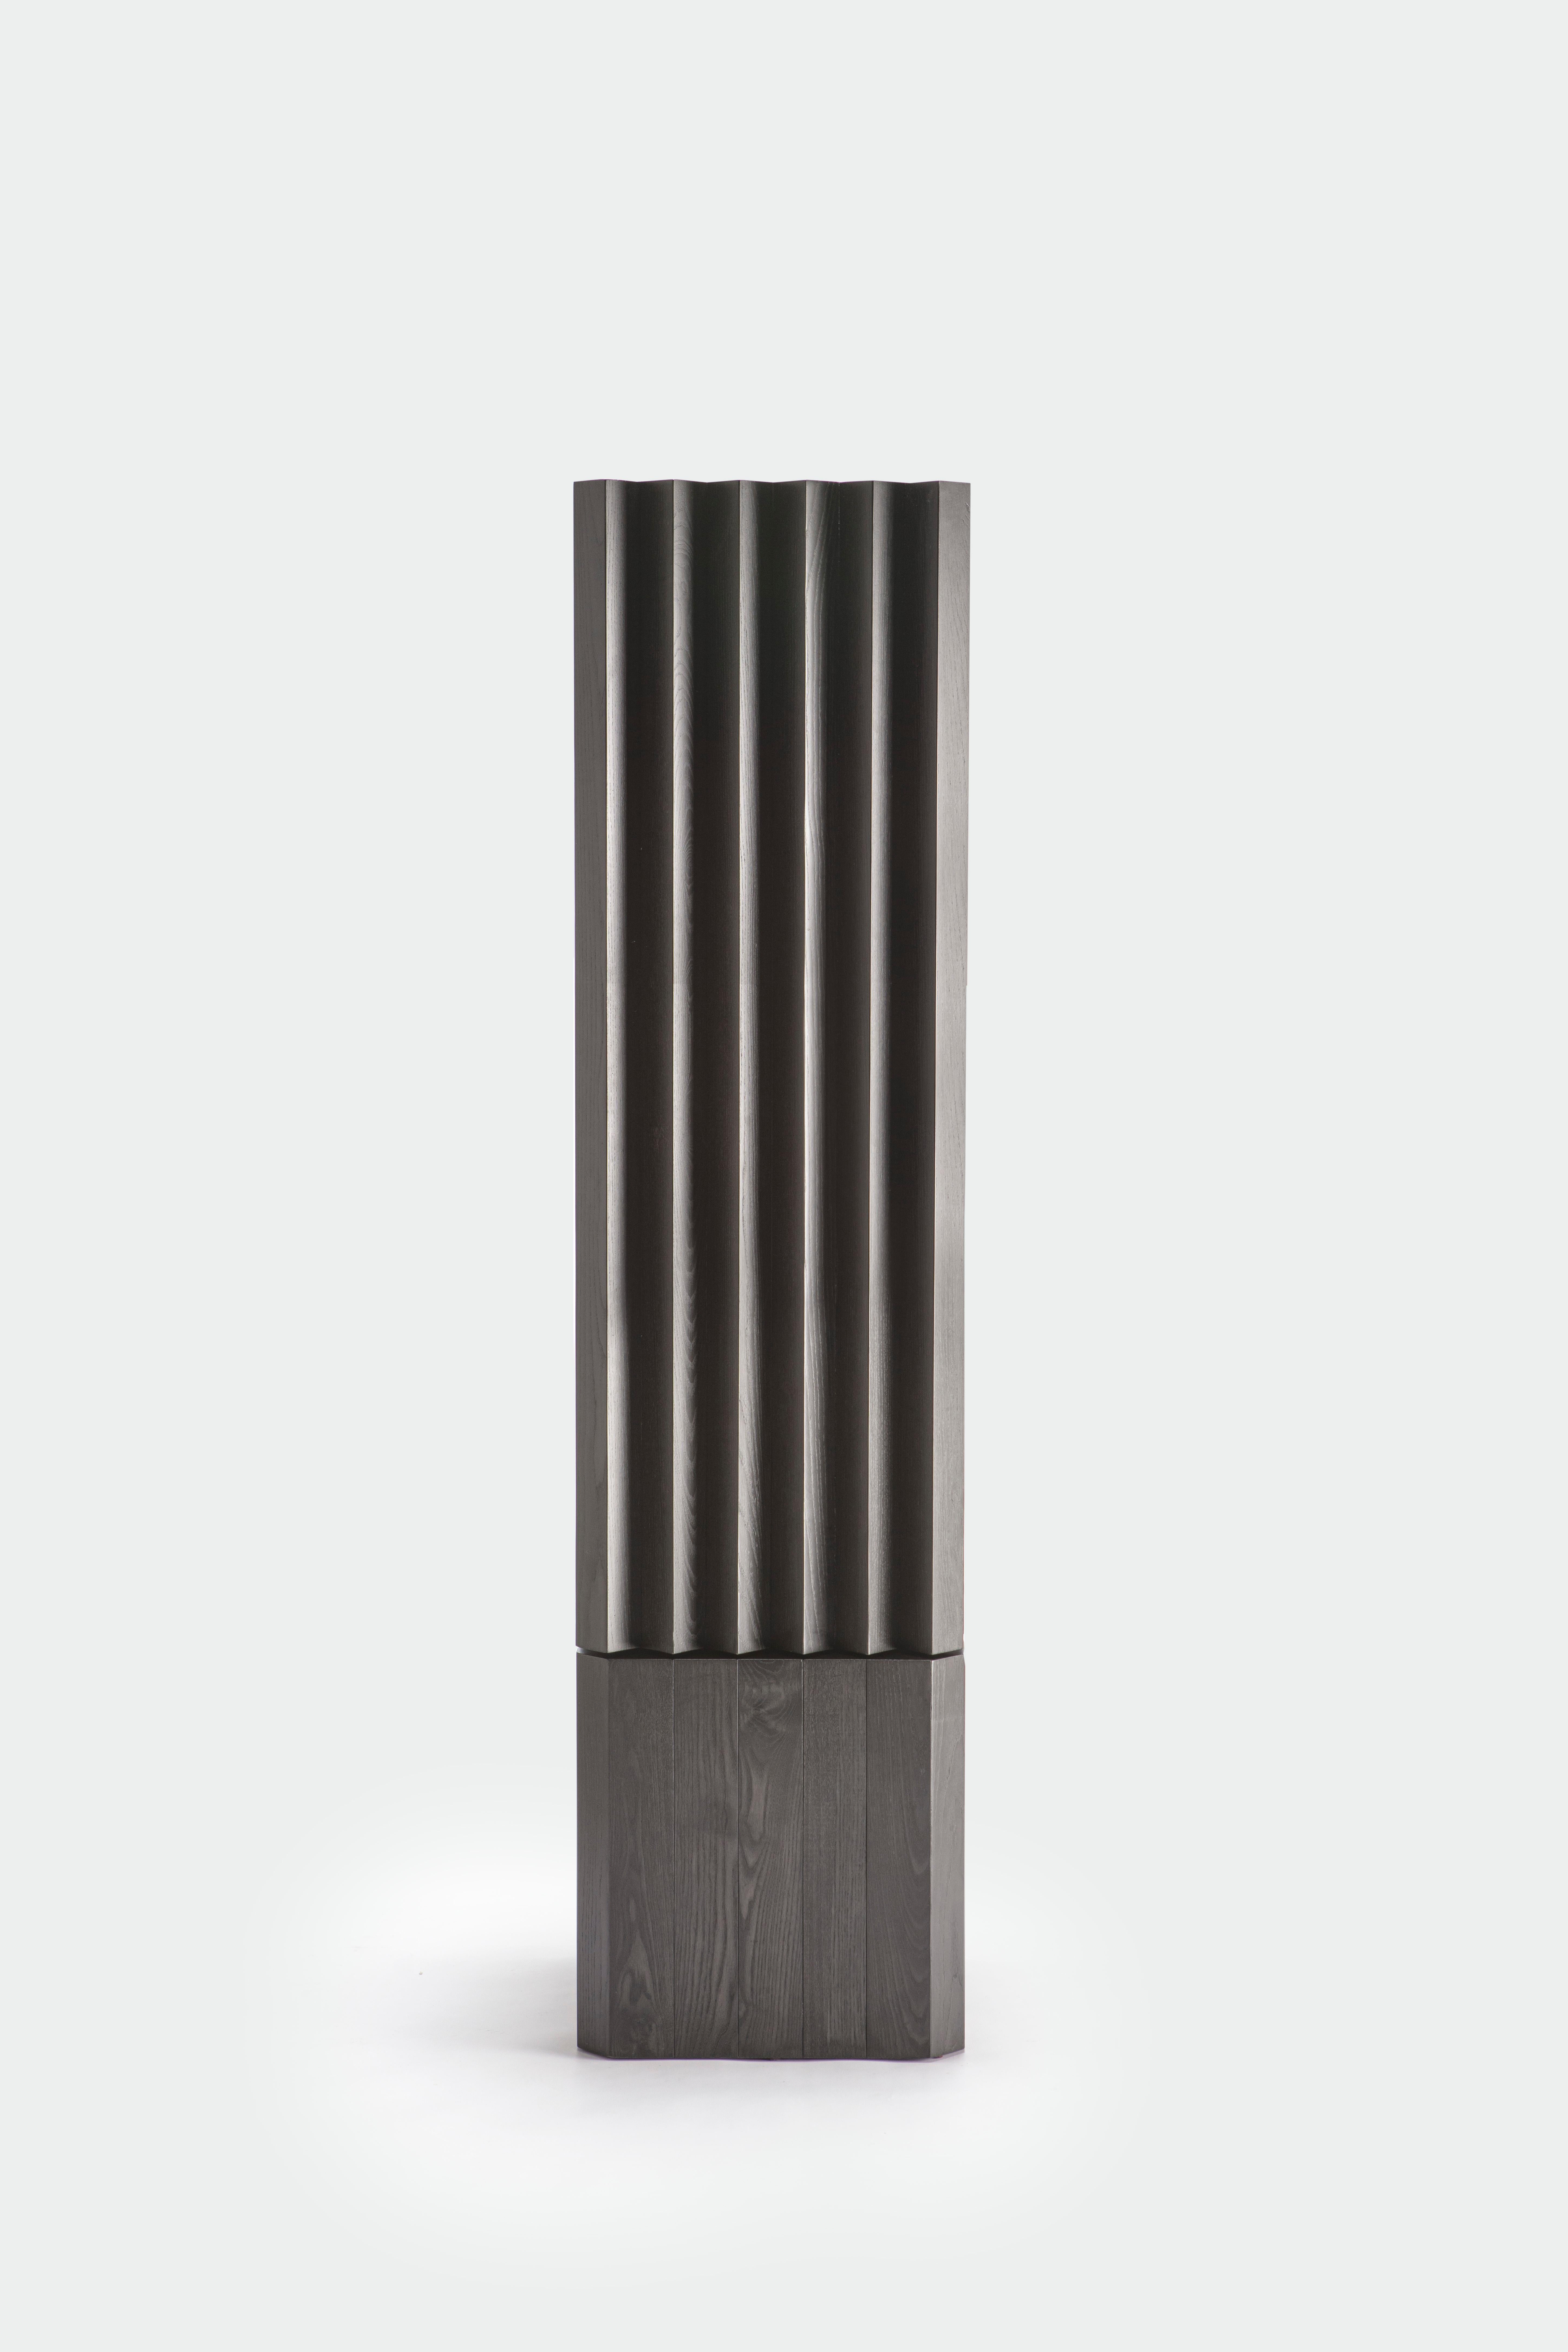 210.M3 Wood Column with Green Interiors by Cara Davide
Dimensions: D 51 x W 51 x H 210 cm 
Materials: Solid wood on multilayer structure, 10mm extra-clear tempered glass shelves, green colored stainless steel (available for the black high cabinet